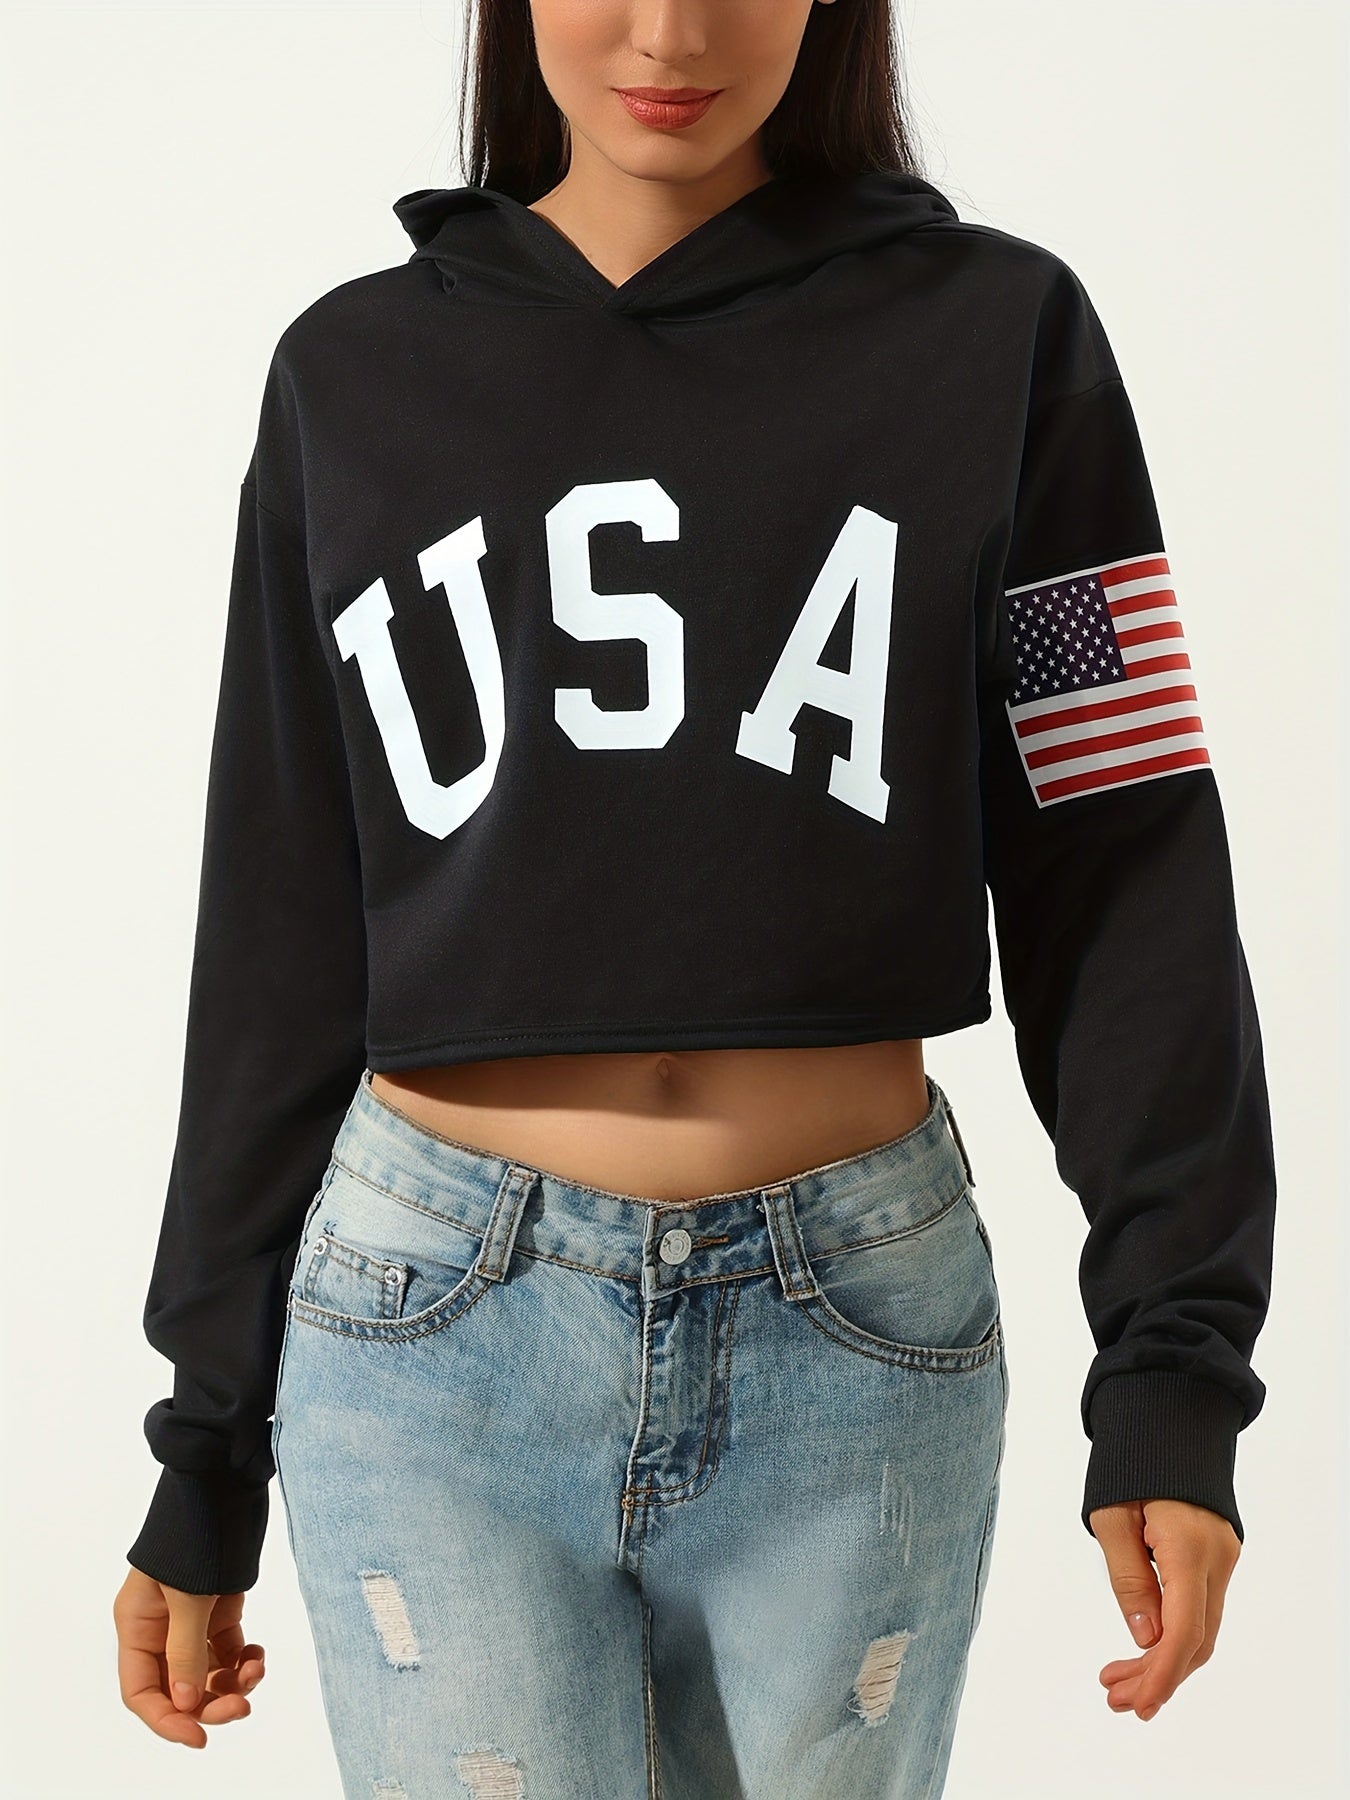 Antmvs Women's USA American Flag Graphic Sweatshirt - Long Sleeve, Round Neck, Casual Sports Style